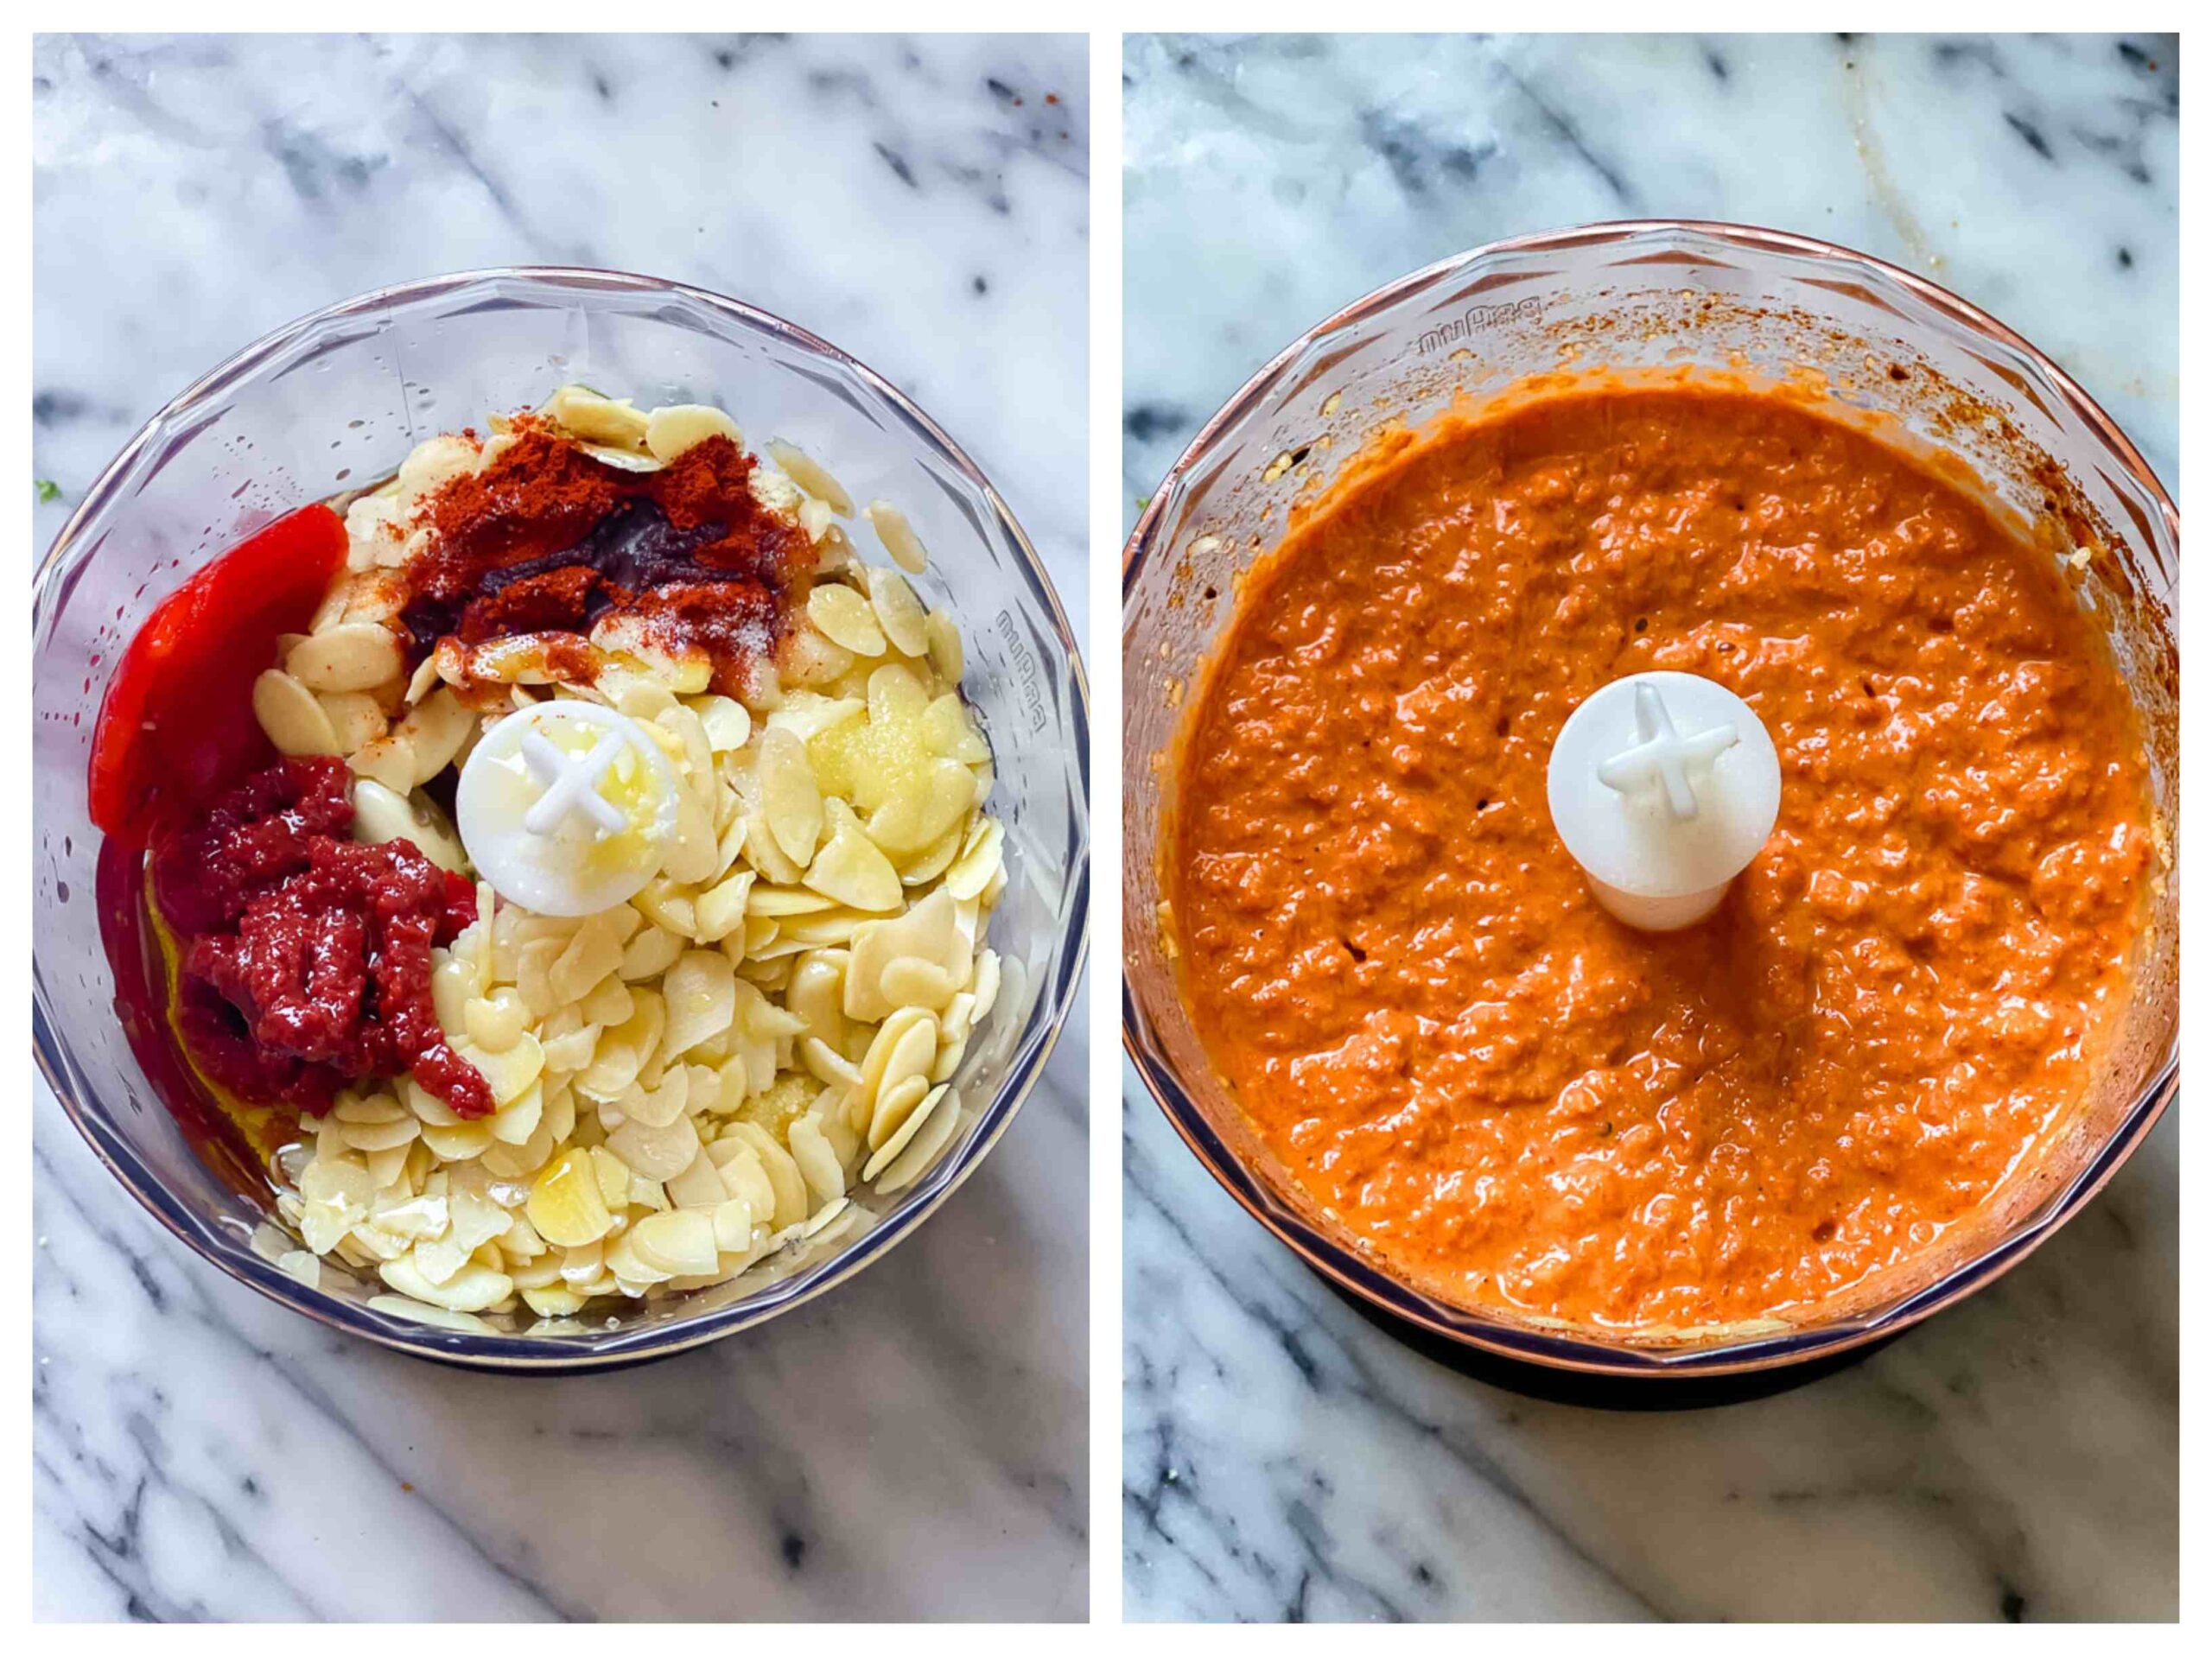 romesco sauce before and after blending